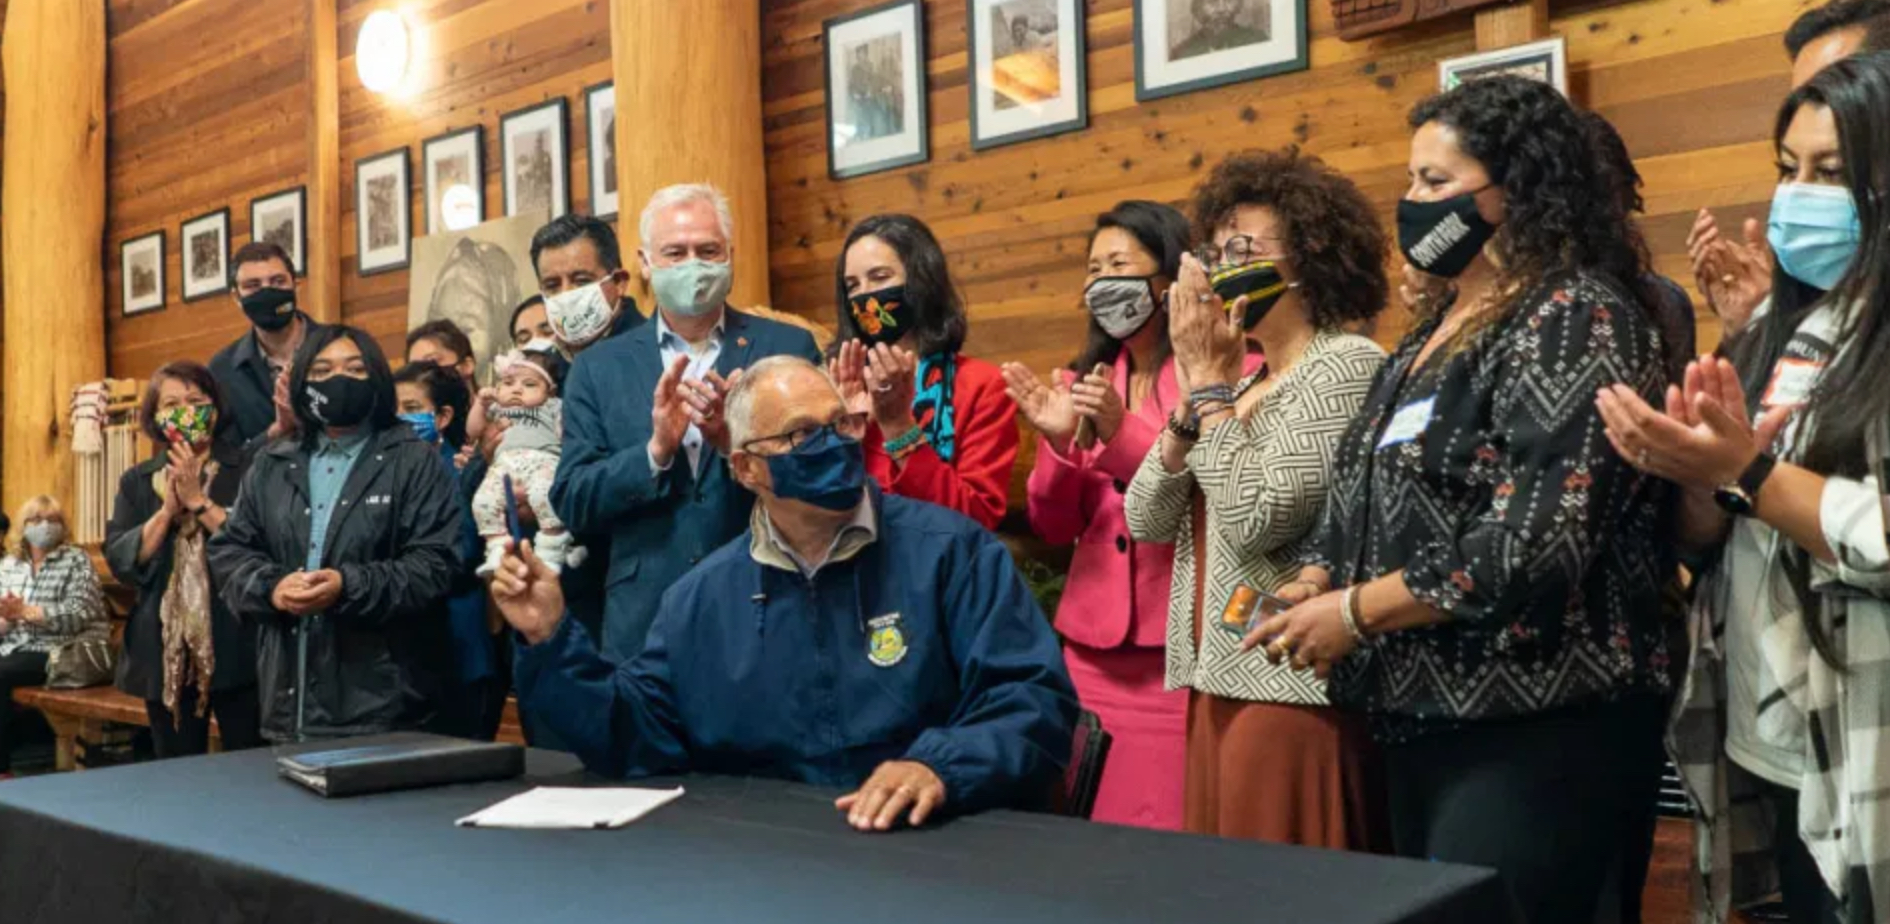 At the Duwamish longhouse, a law is signed requiring environmental justice from state agencies